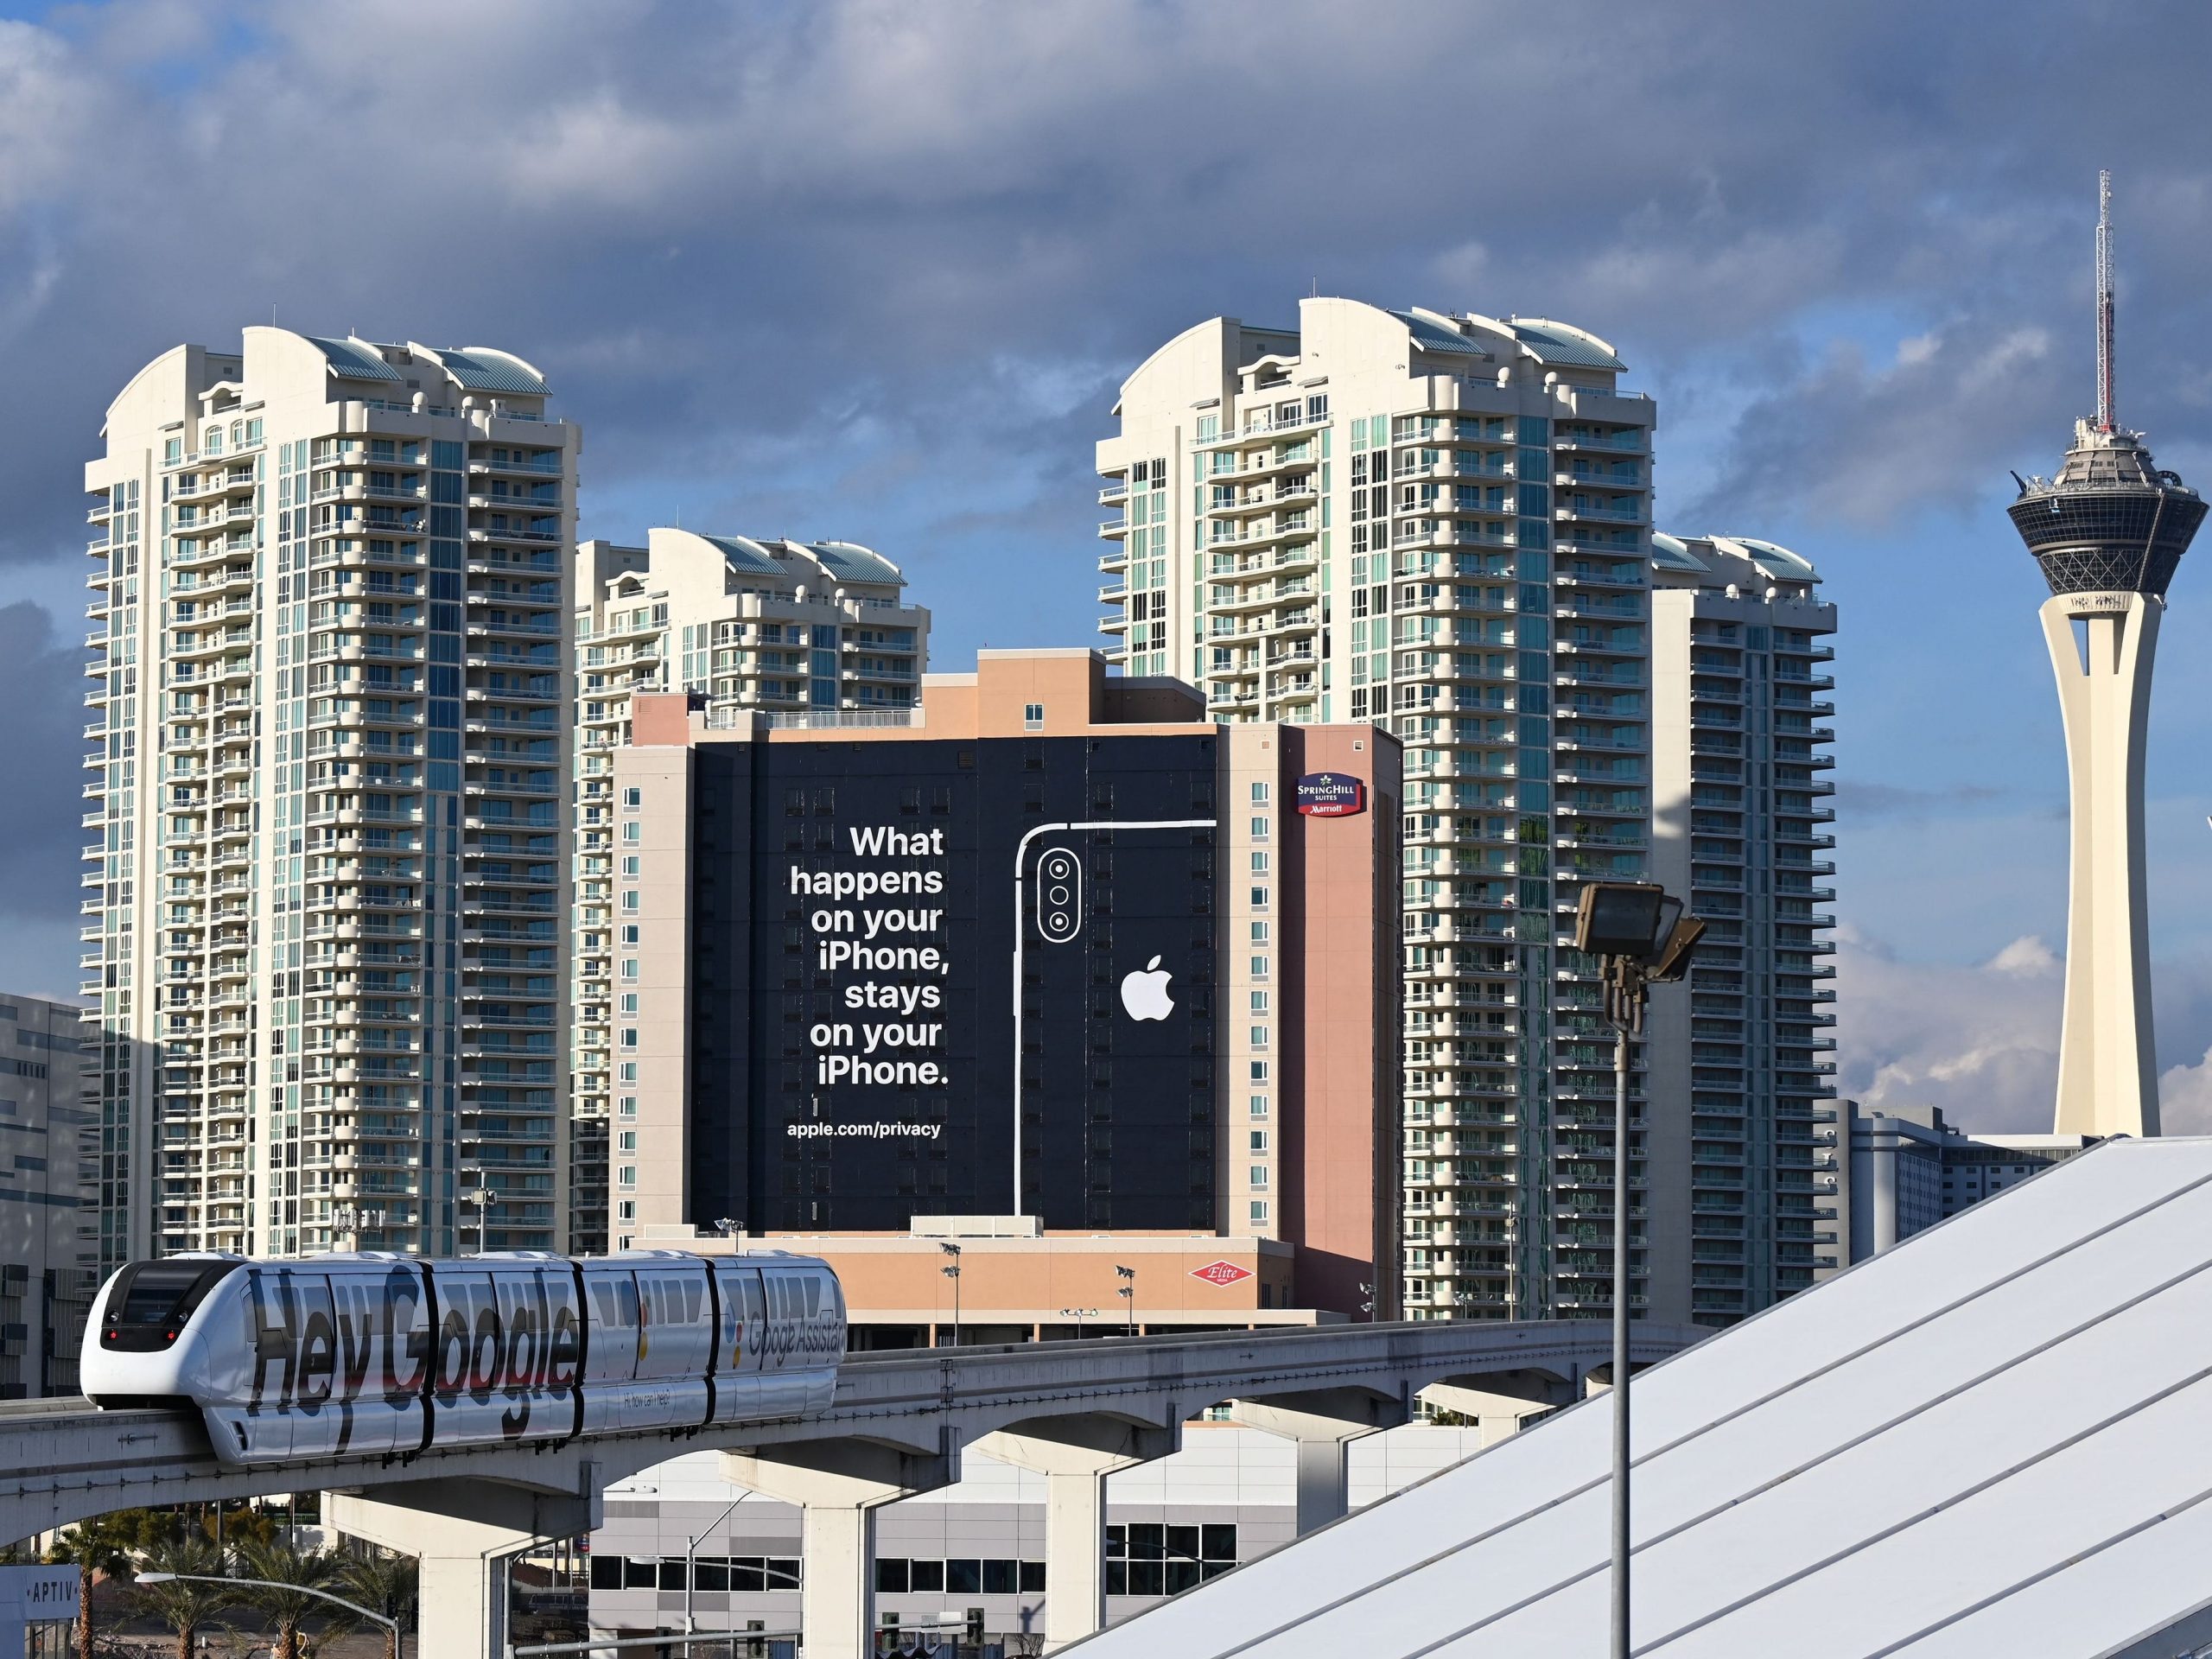 A 2019 Apple privacy advertisement in Las Vegas